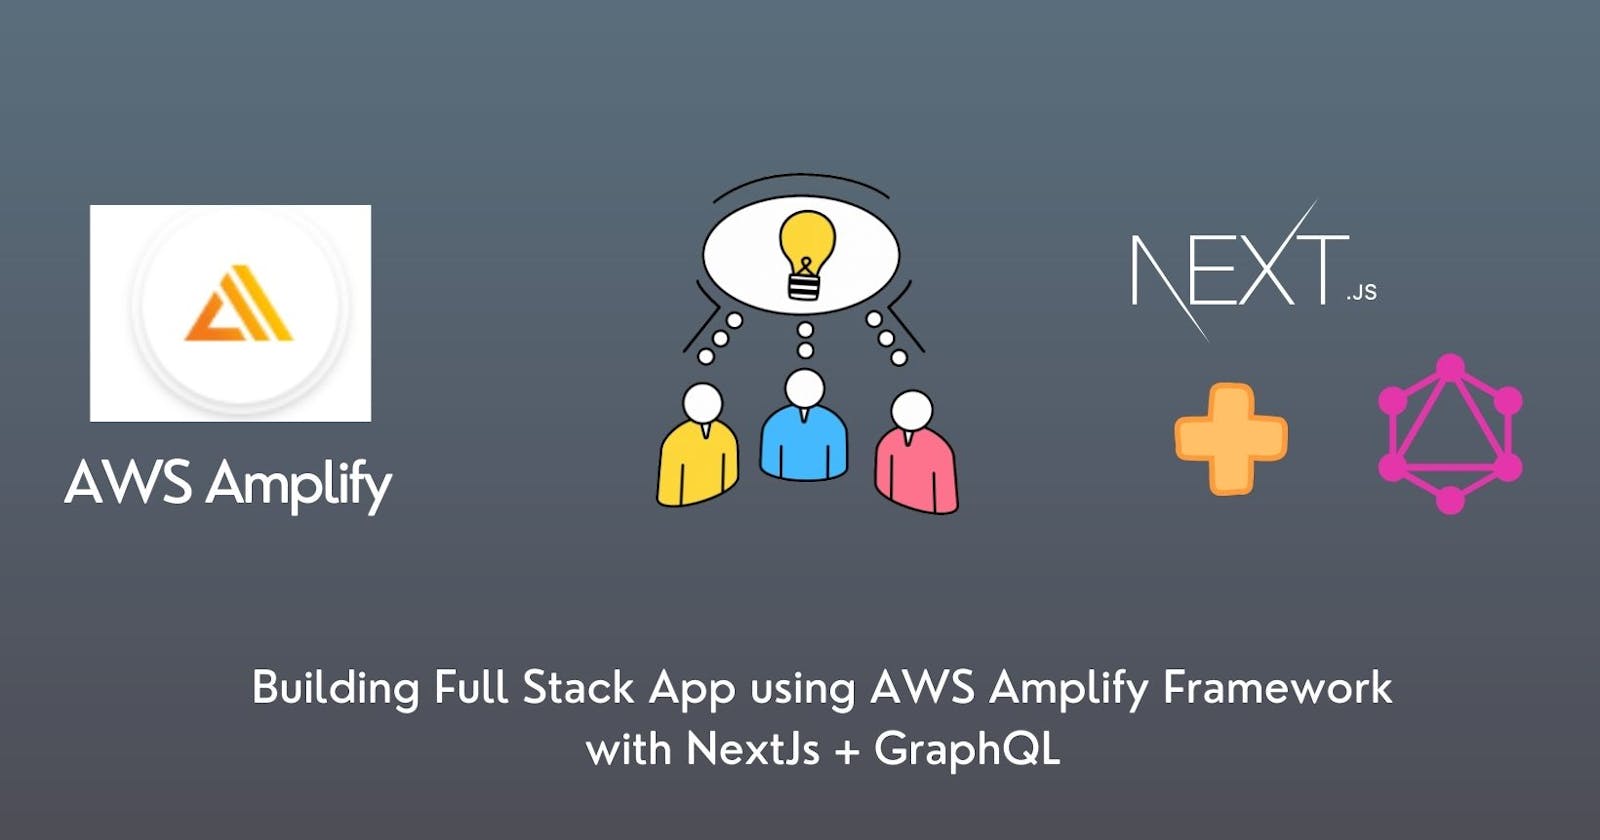 AWS Amplify: A Friend Indeed